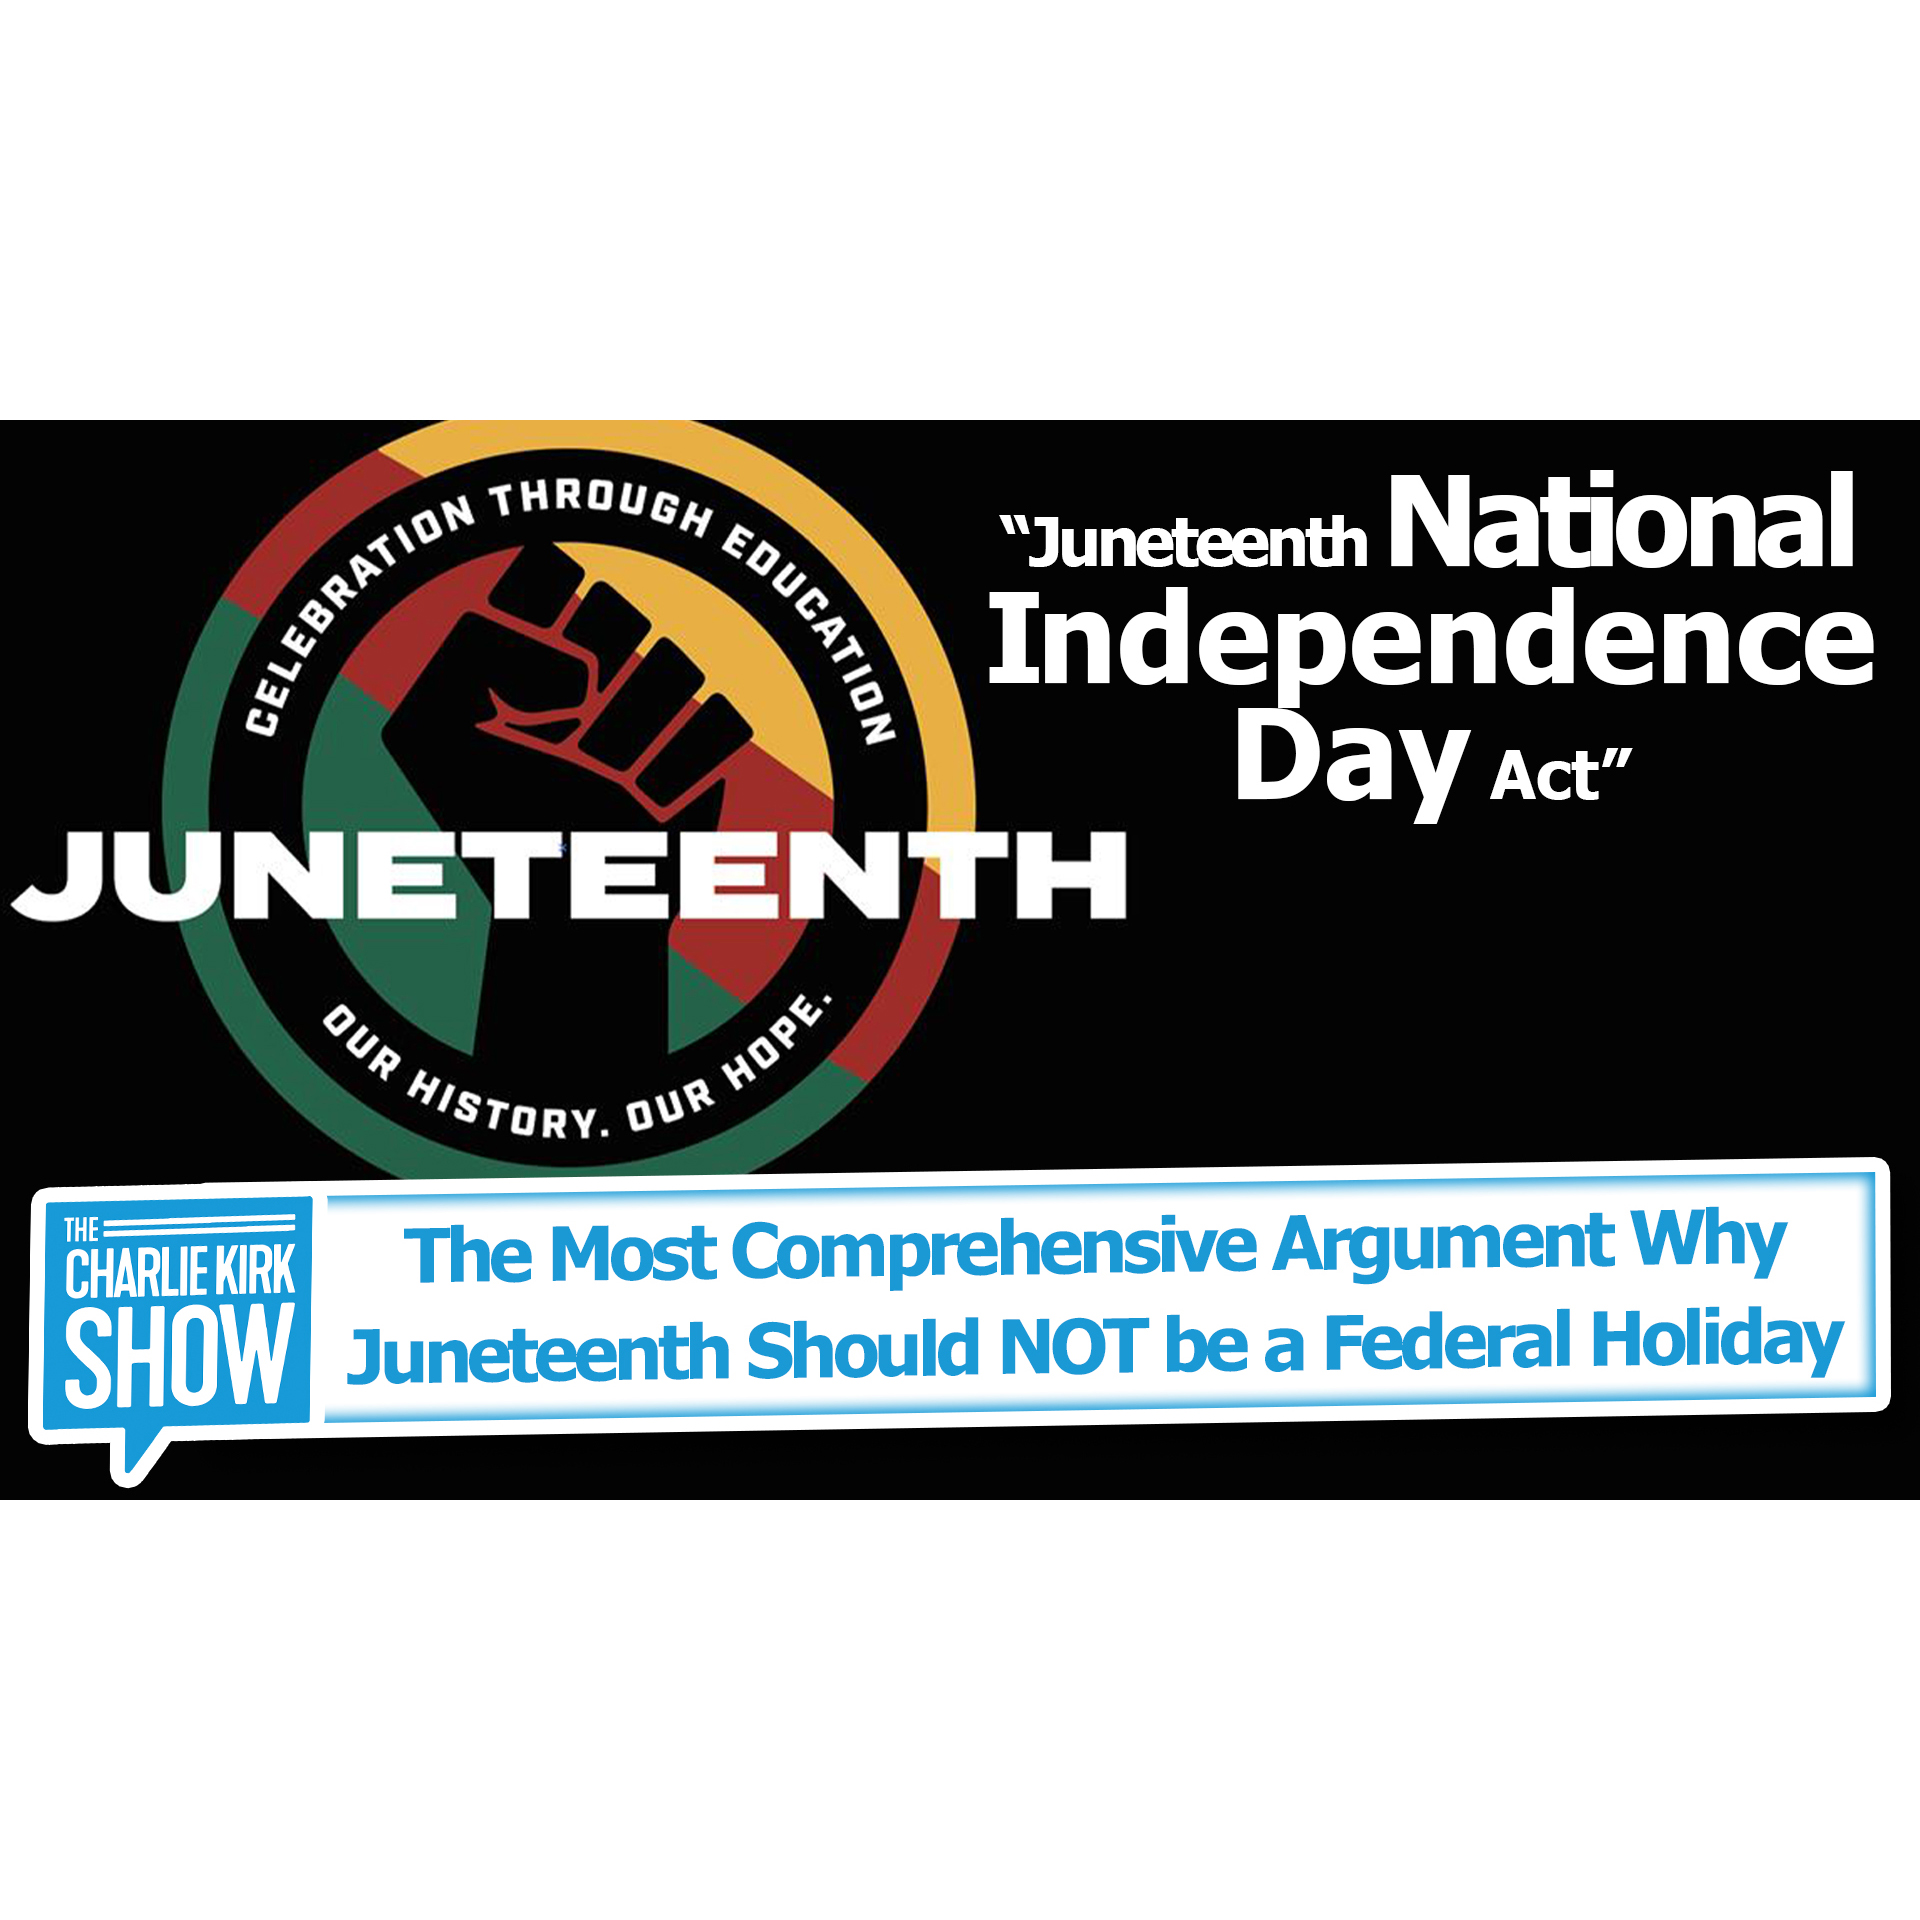 The Most Comprehensive Argument Why Juneteenth Should NOT be a Federal Holiday